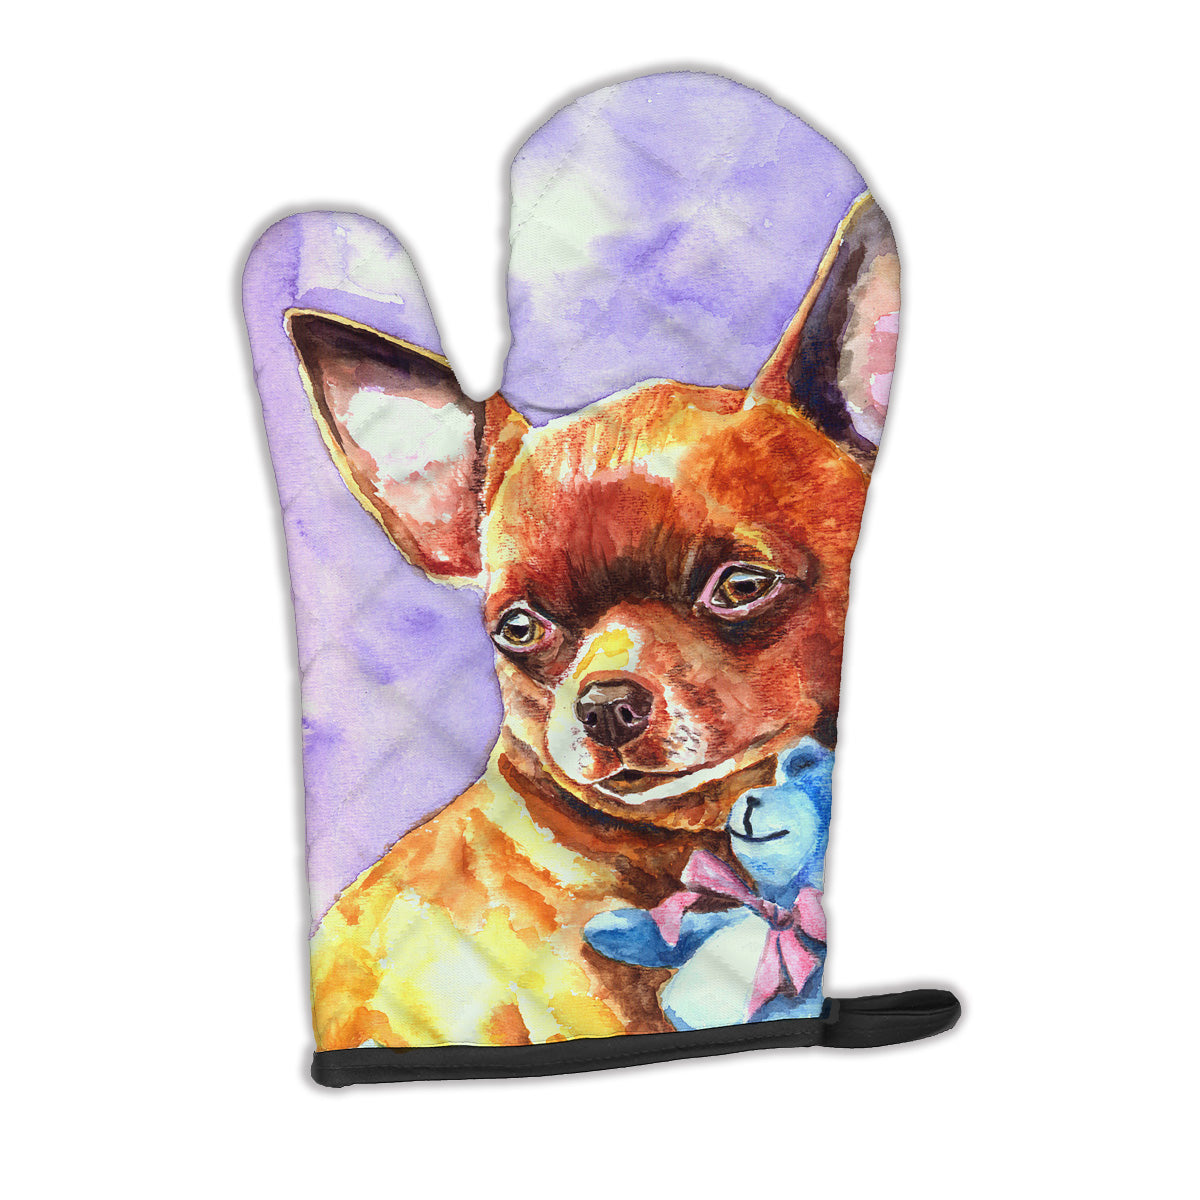 Chihuahua with Teddy Bear Oven Mitt 7340OVMT